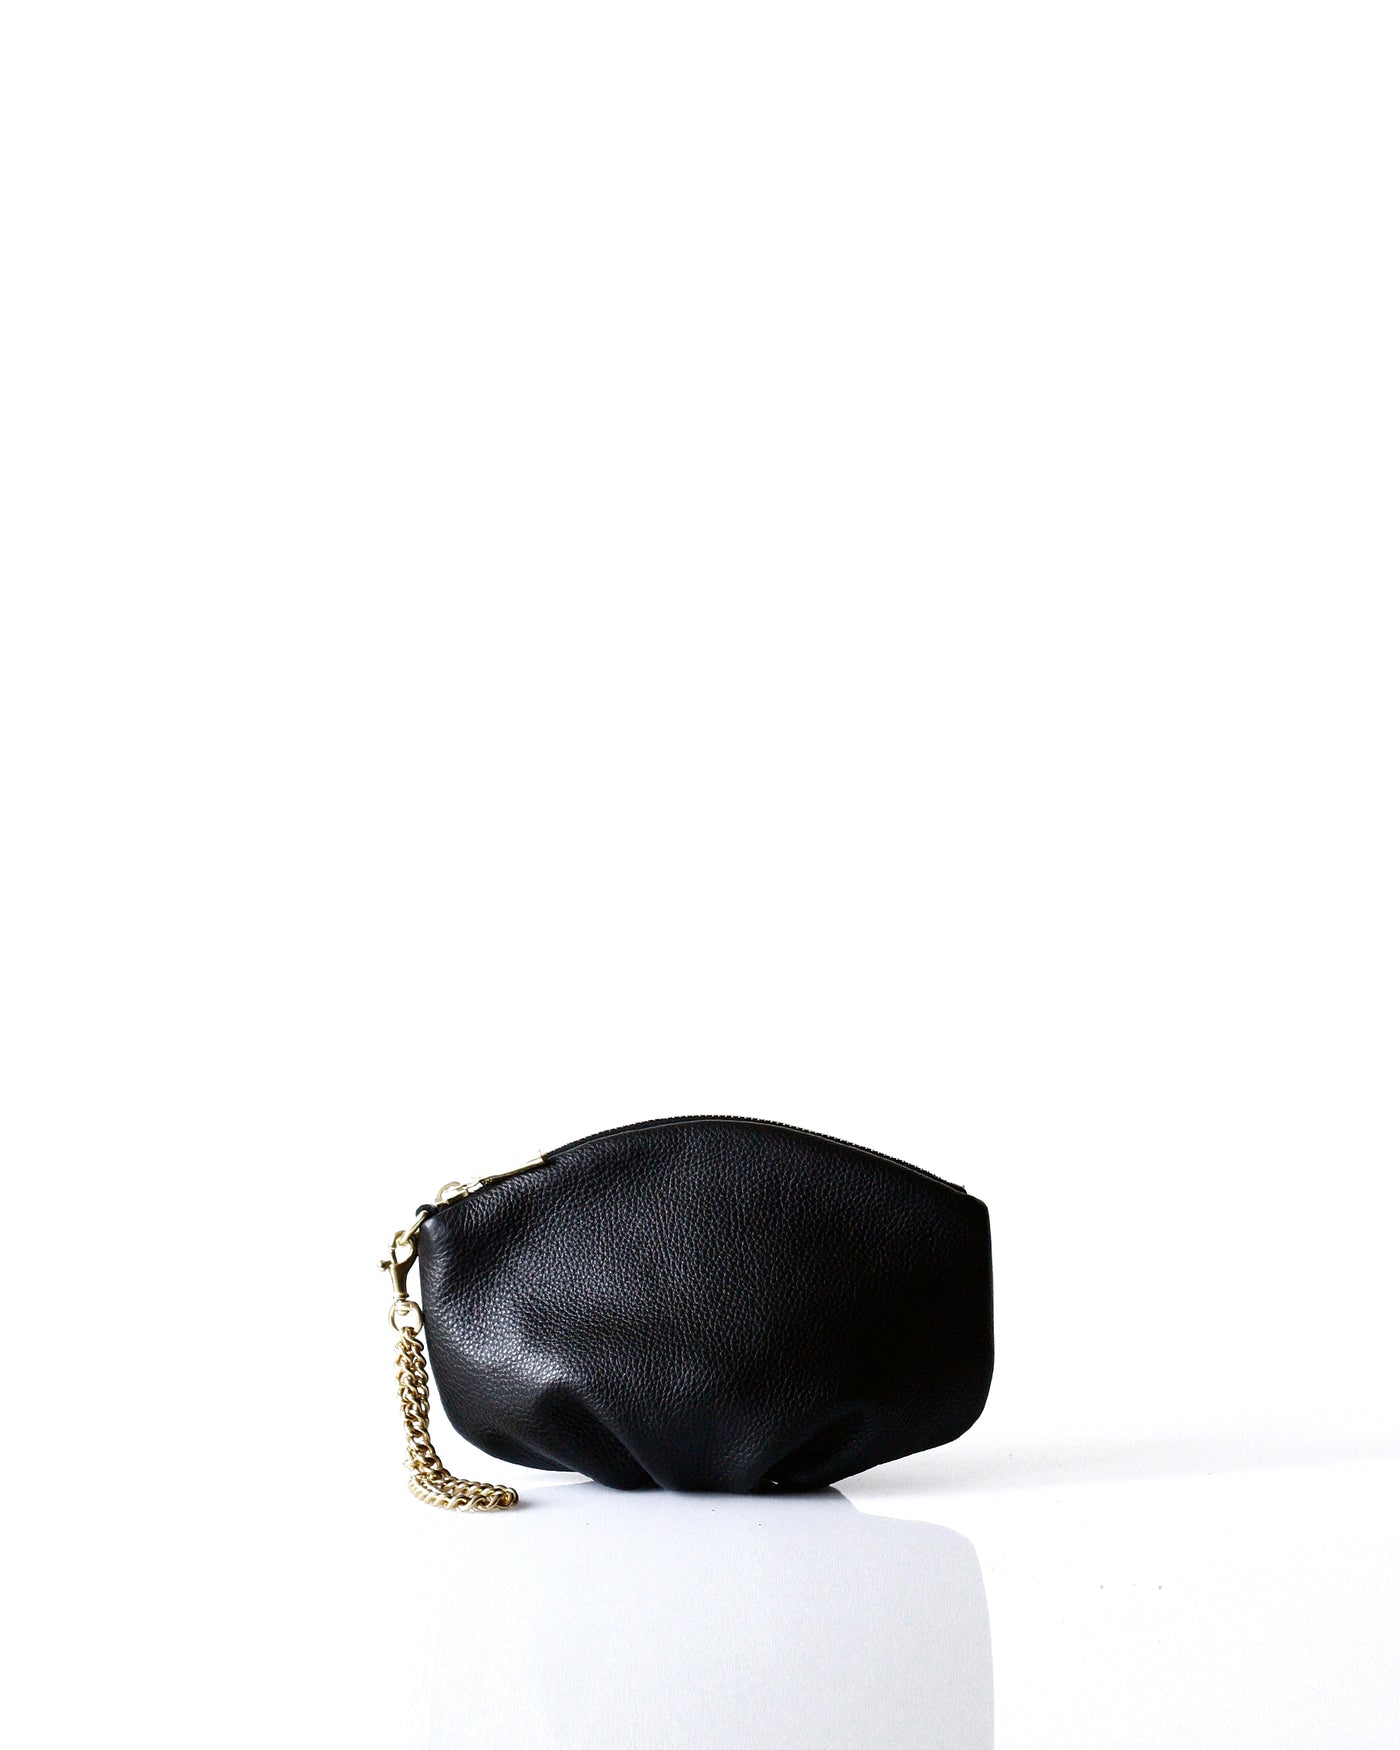 m Pochette - Opelle bag Permanent Collection - Opelle leather handbag handcrafted leather bag toronto Canada